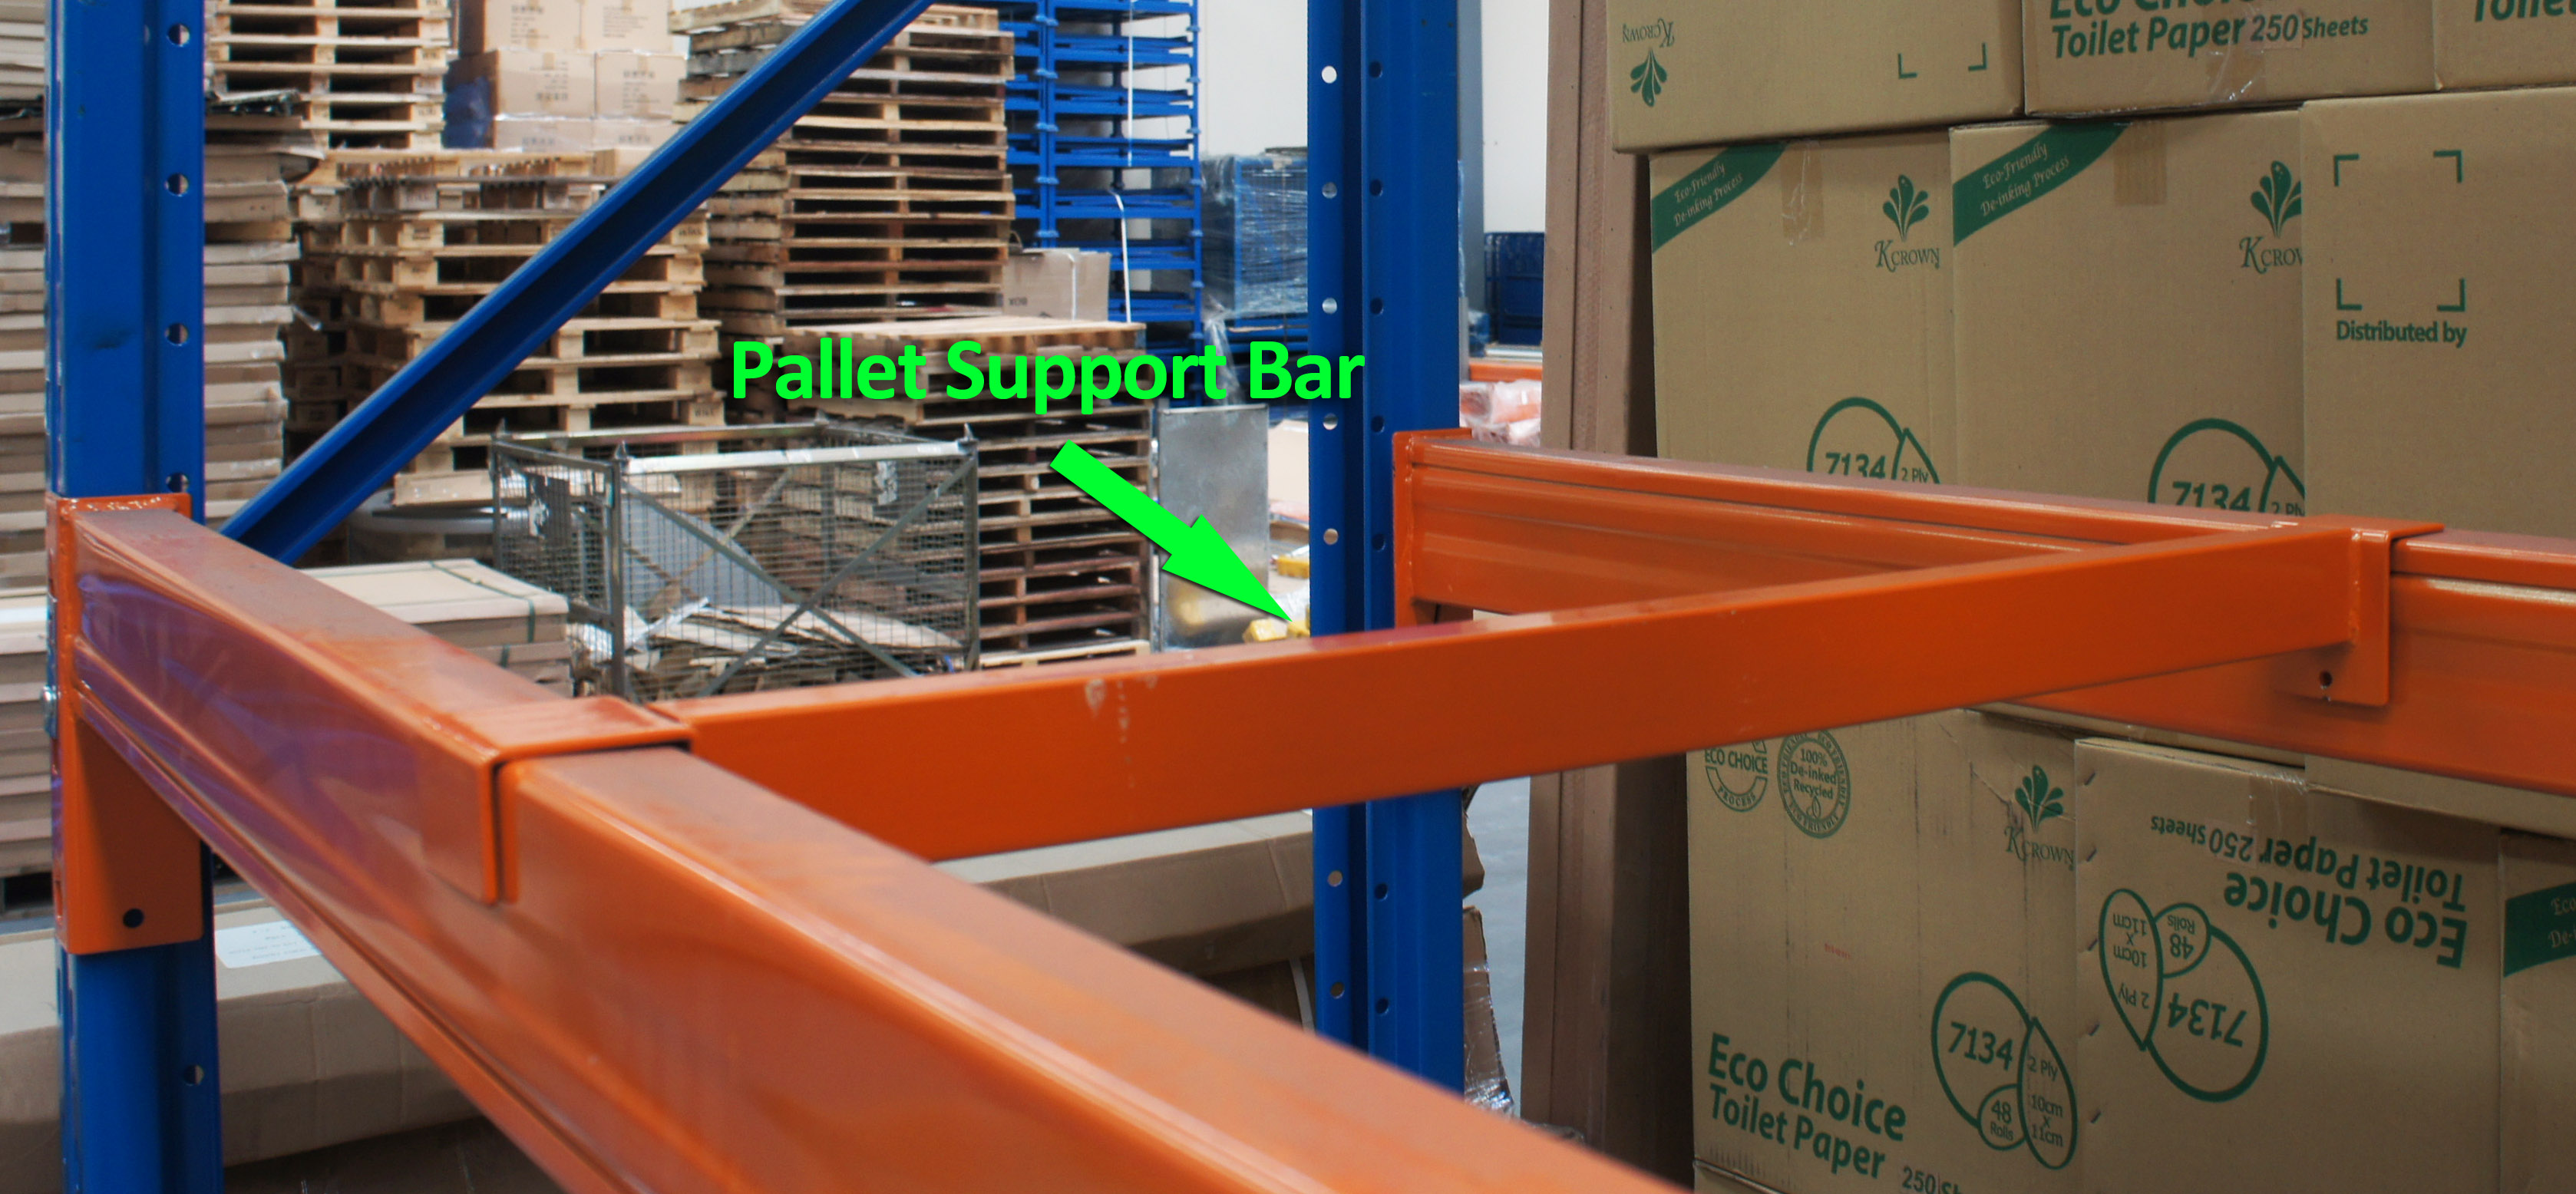 Extra Heavy Duty Pallet Rack Racking Supporting Support Bar Dexion Warehouse Ebay 4998